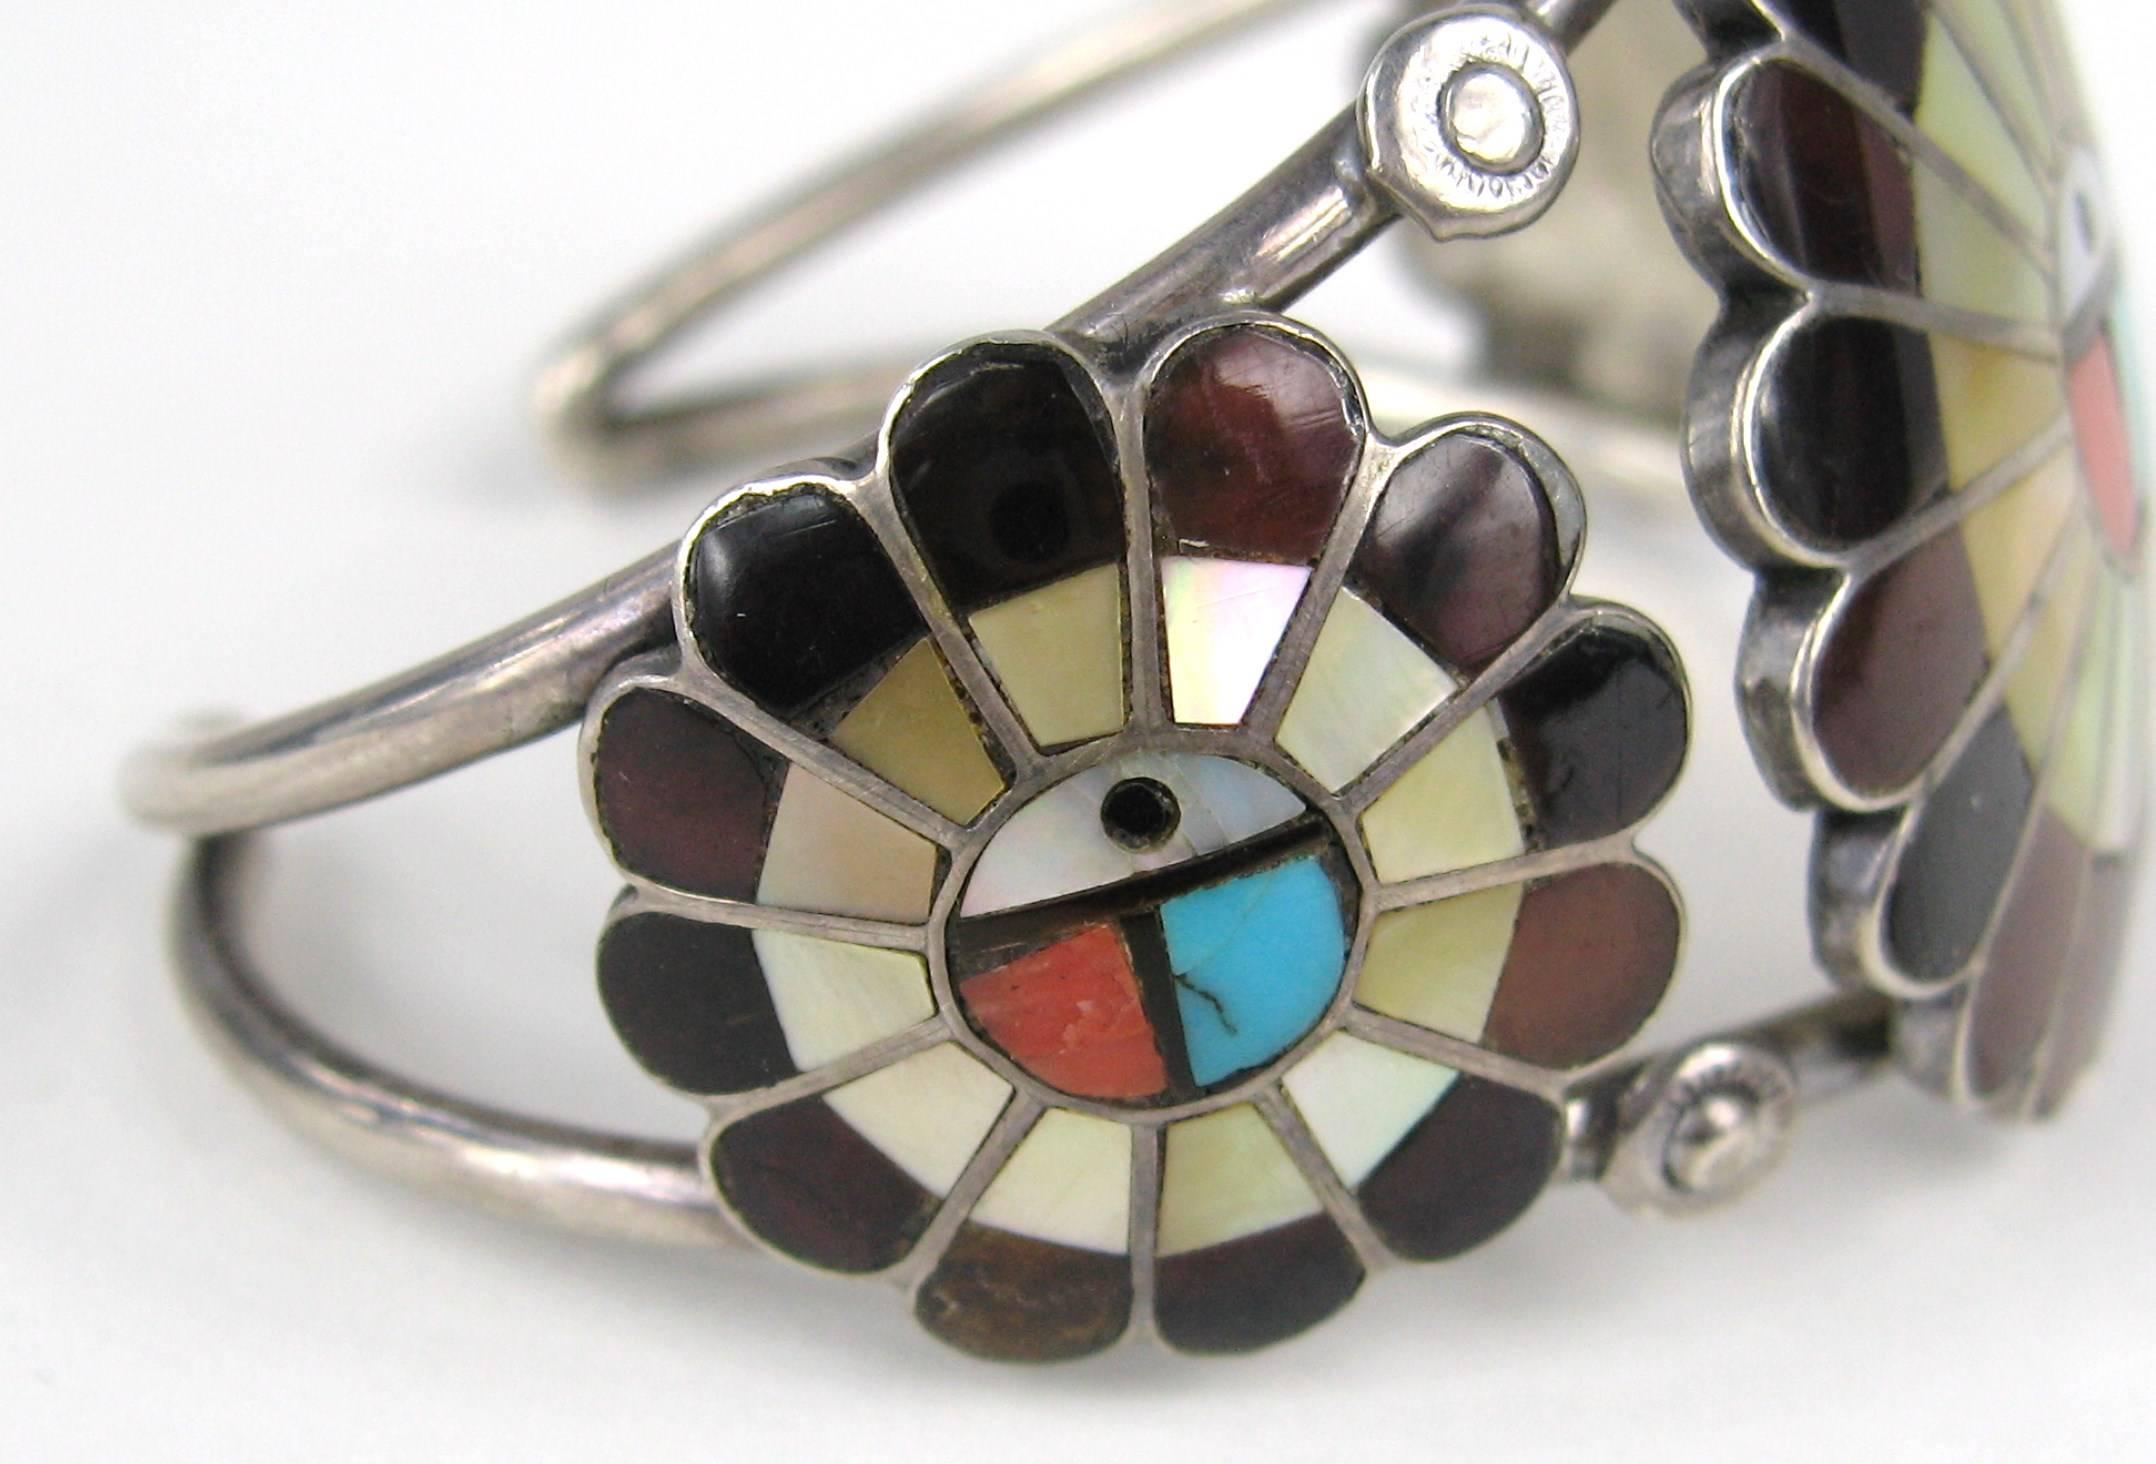 Zuni sun face bracelet. Sleeping Beauty Turquoise, Coral, Jet, Abalone, and Penn Shell. 2 Ring Band. Measuring 1.50 in top to bottom. opening is .95 in on the cuff. Will fit a 6 to 7 in wrist. Is a bit pliable to fit. This is out of a massive